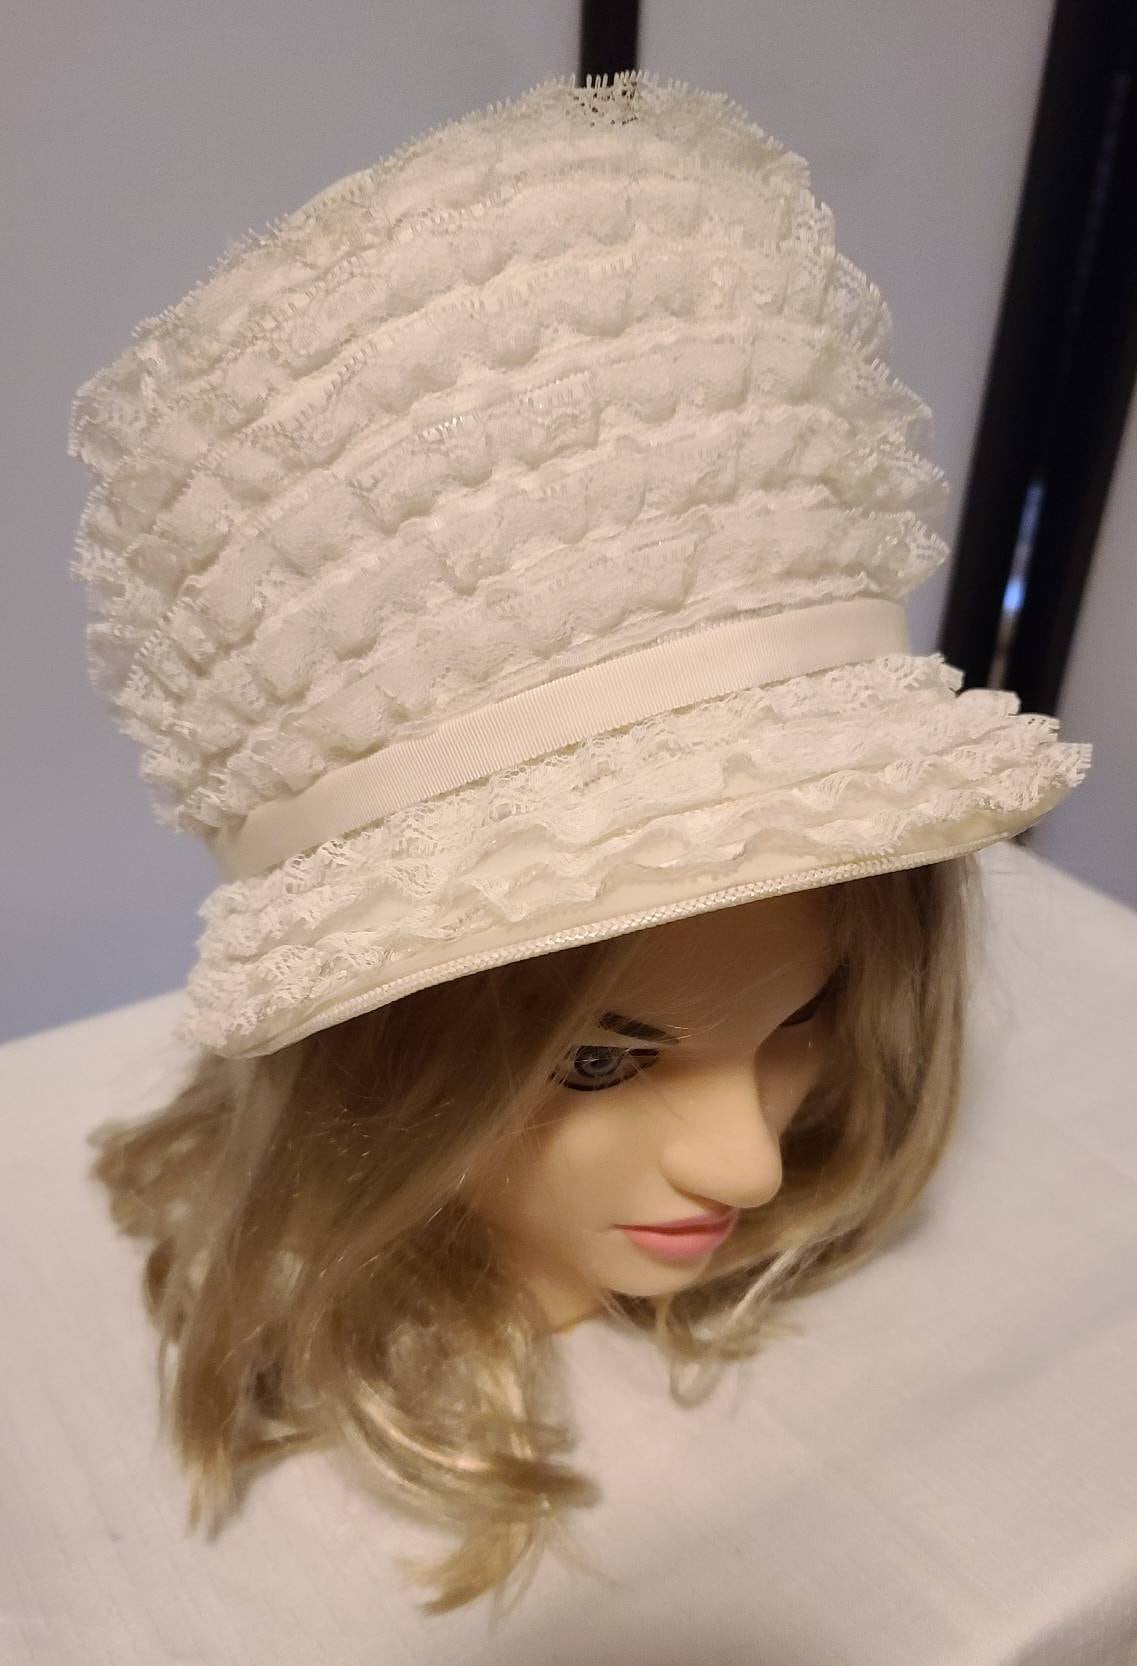 Vintage Lace Hat 1960s Tall Round White Lace Ruffle Pouf Hat Small Brim Back Bow Mod Boho Wedding Bridal 21.5 in.